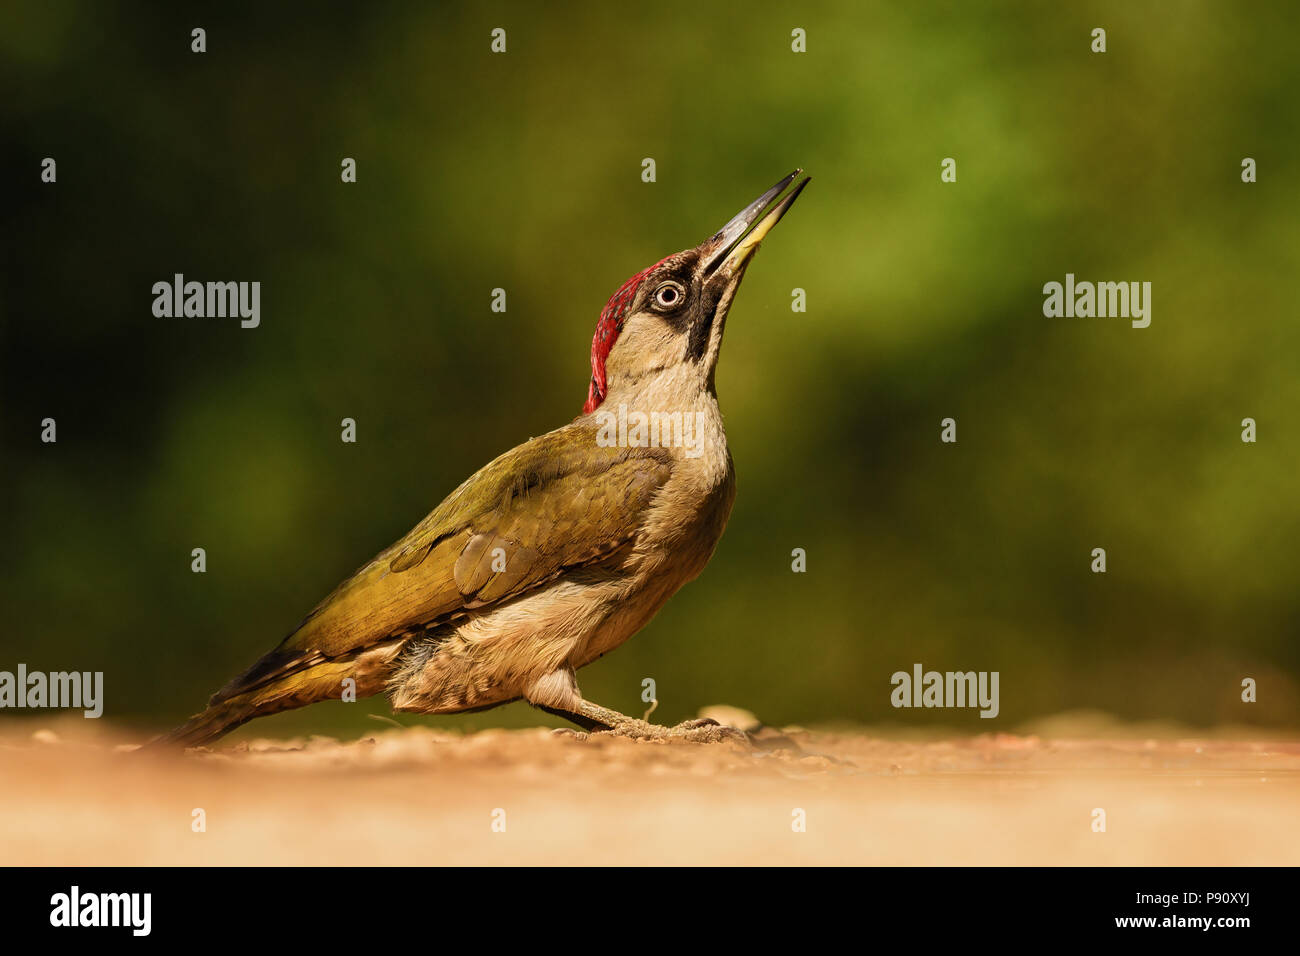 Eurasian Green Woodpecker - Picus viridis, beautiful green shy woodpecker from European forests and woodlands. Stock Photo